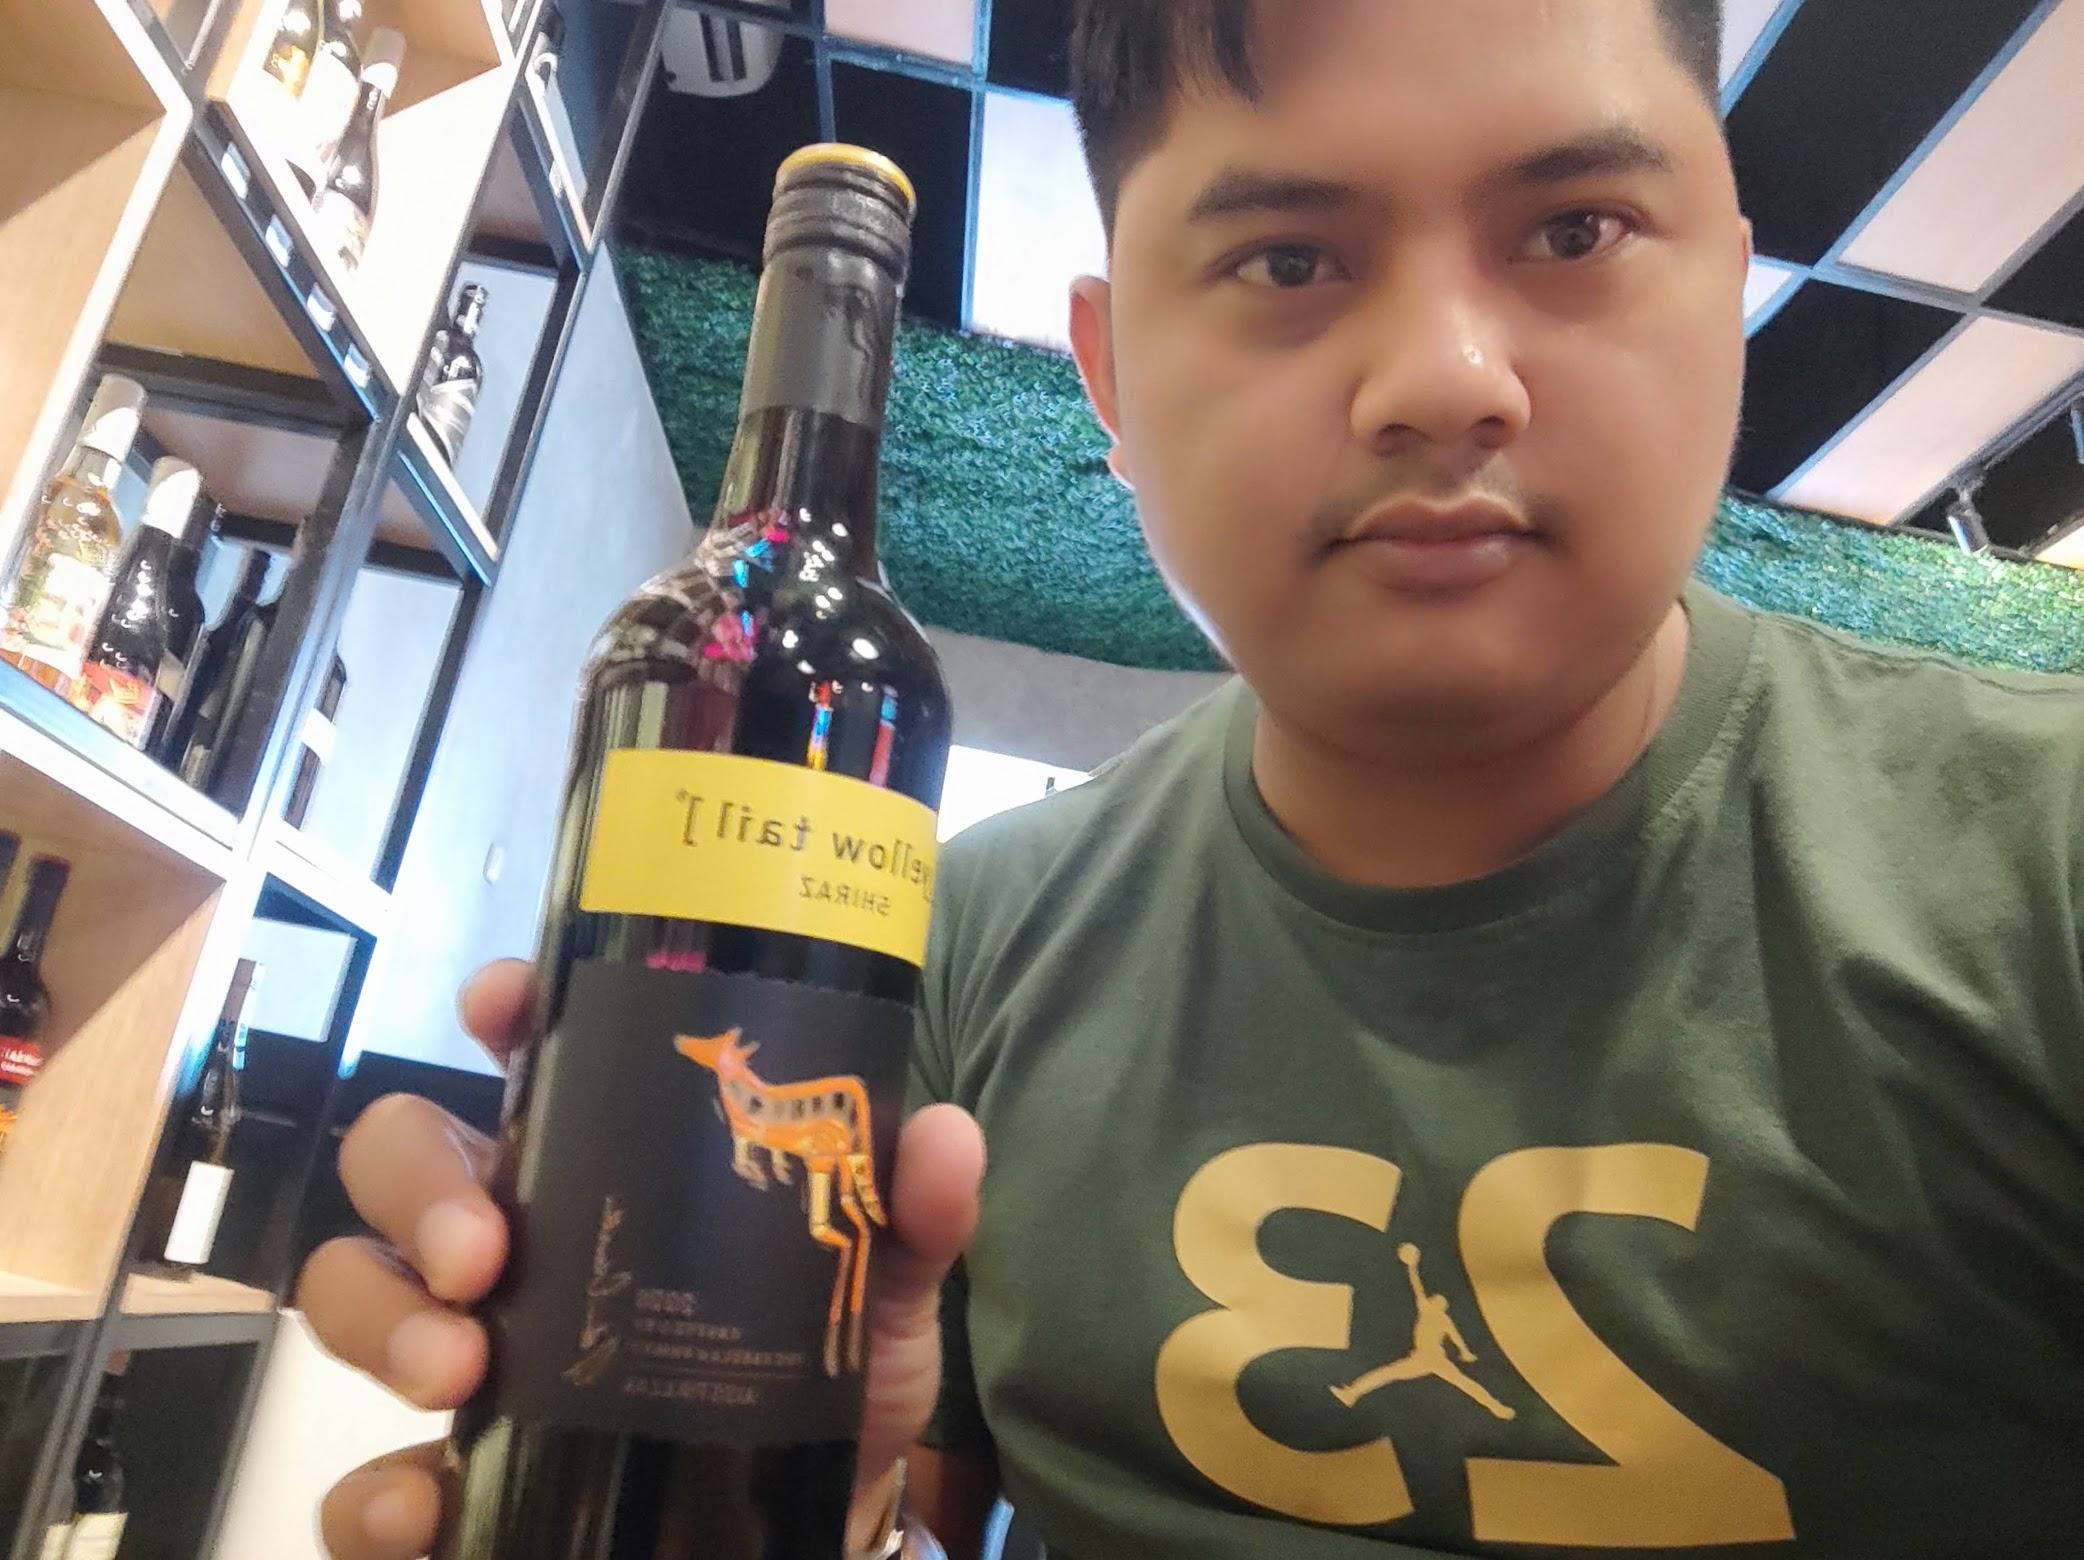 Cabernet Steak And Wine review